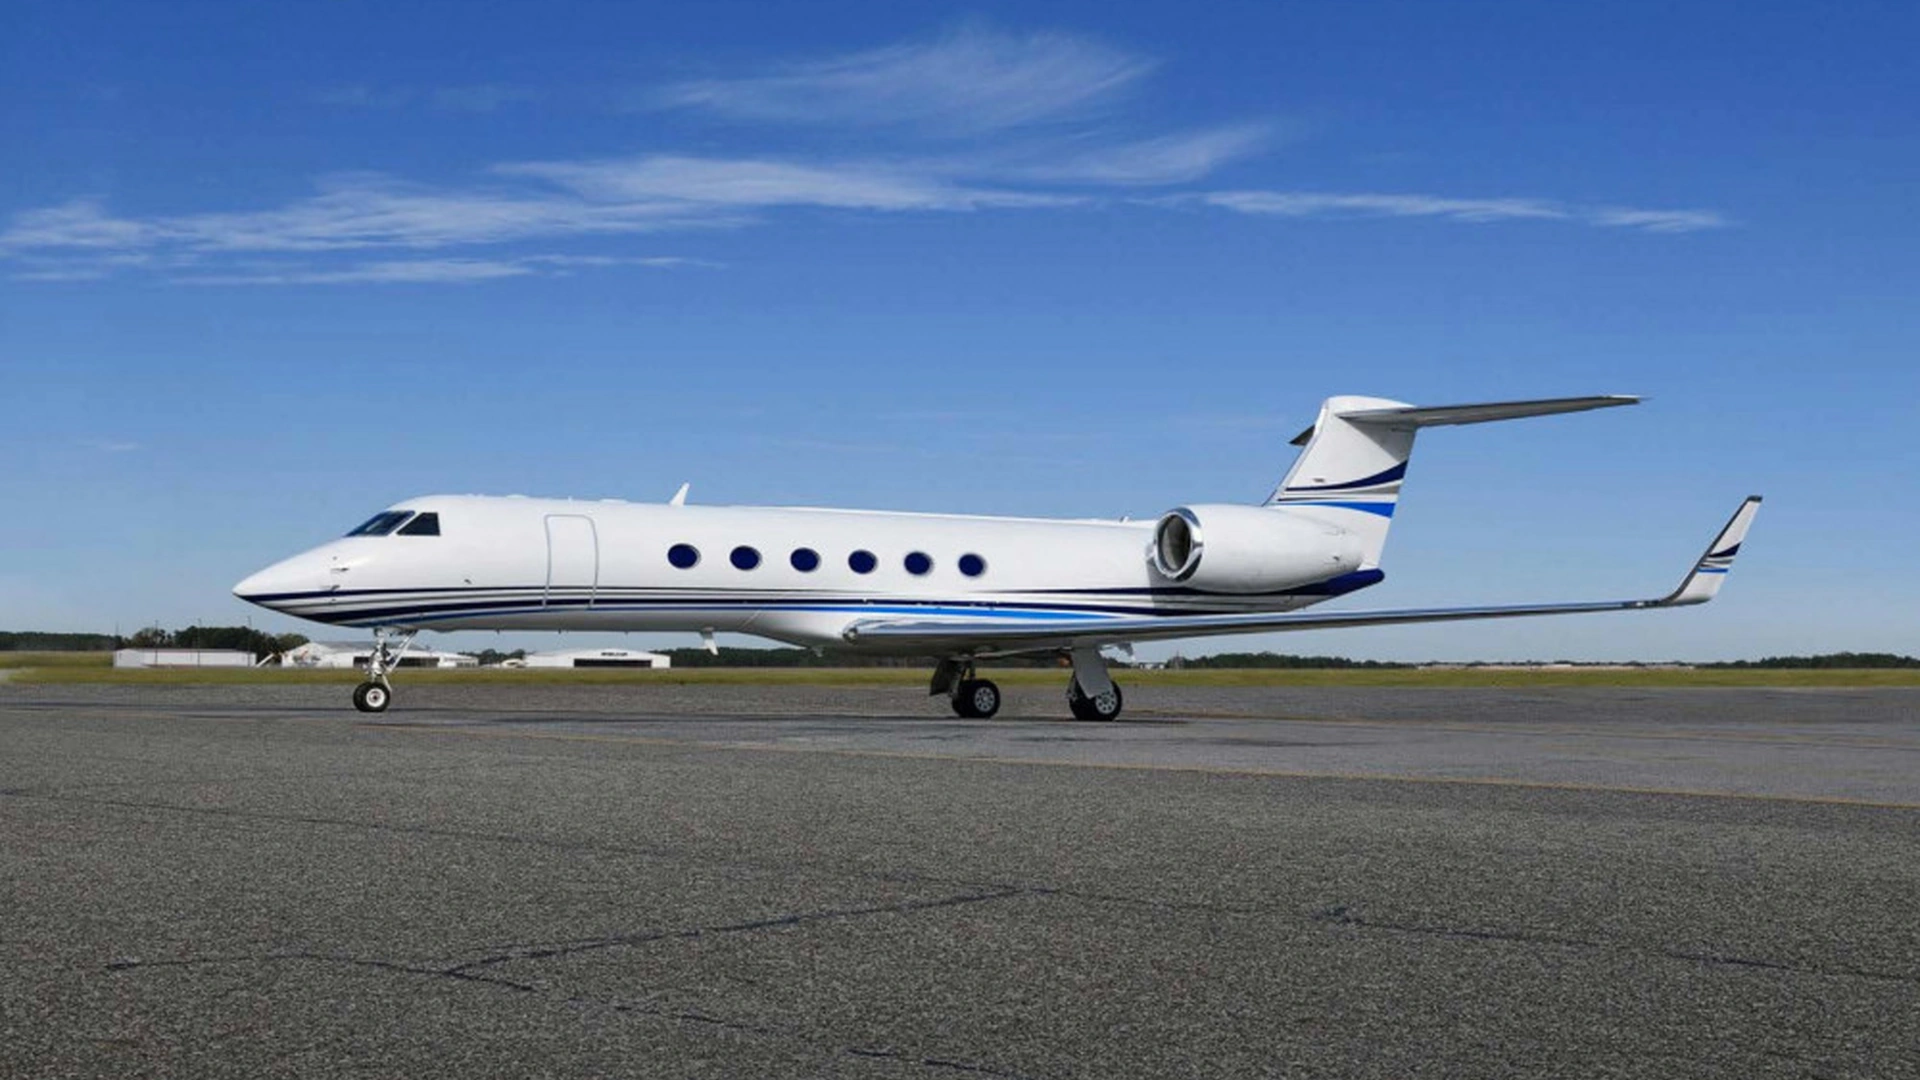 Alerion Gulfstream V - N962MM available for private charter by Alerion Aviation.